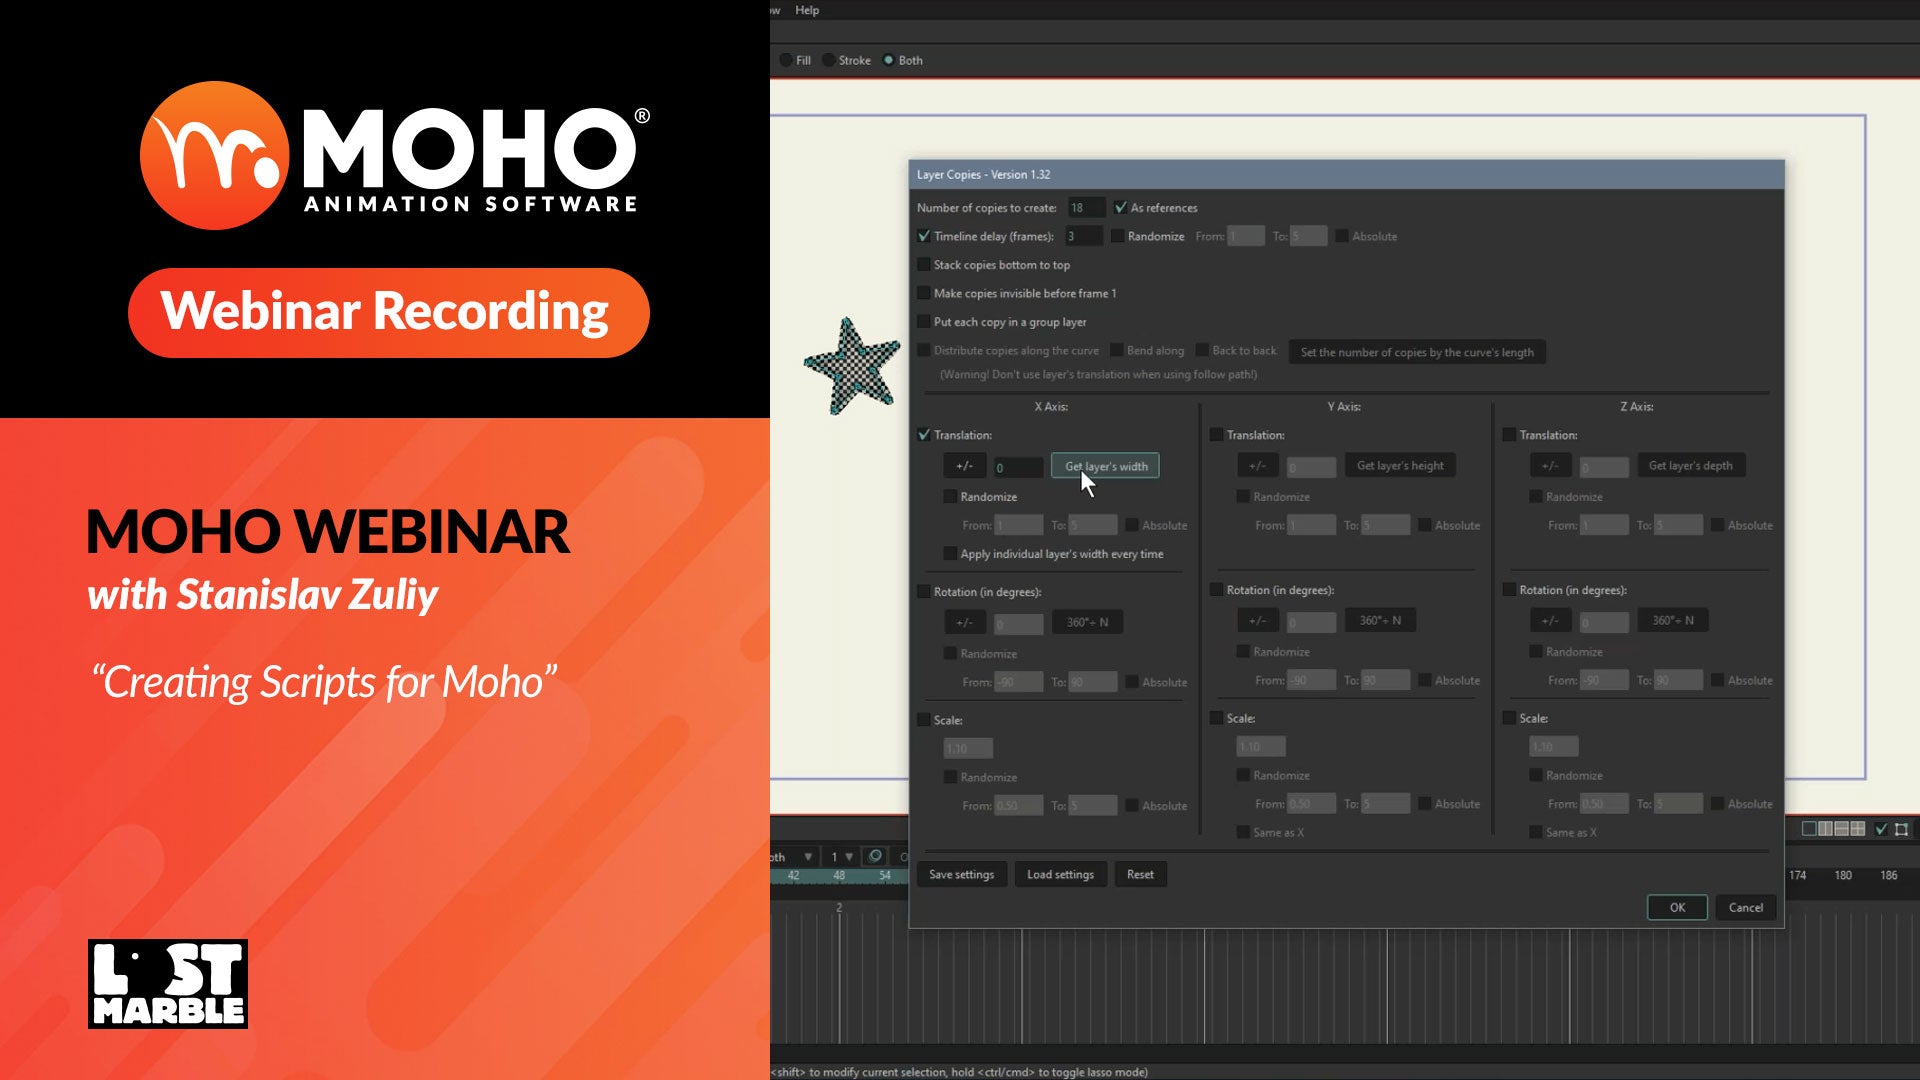 Webinar recording: Creating Scripts for Moho with Stanislav Zuliy